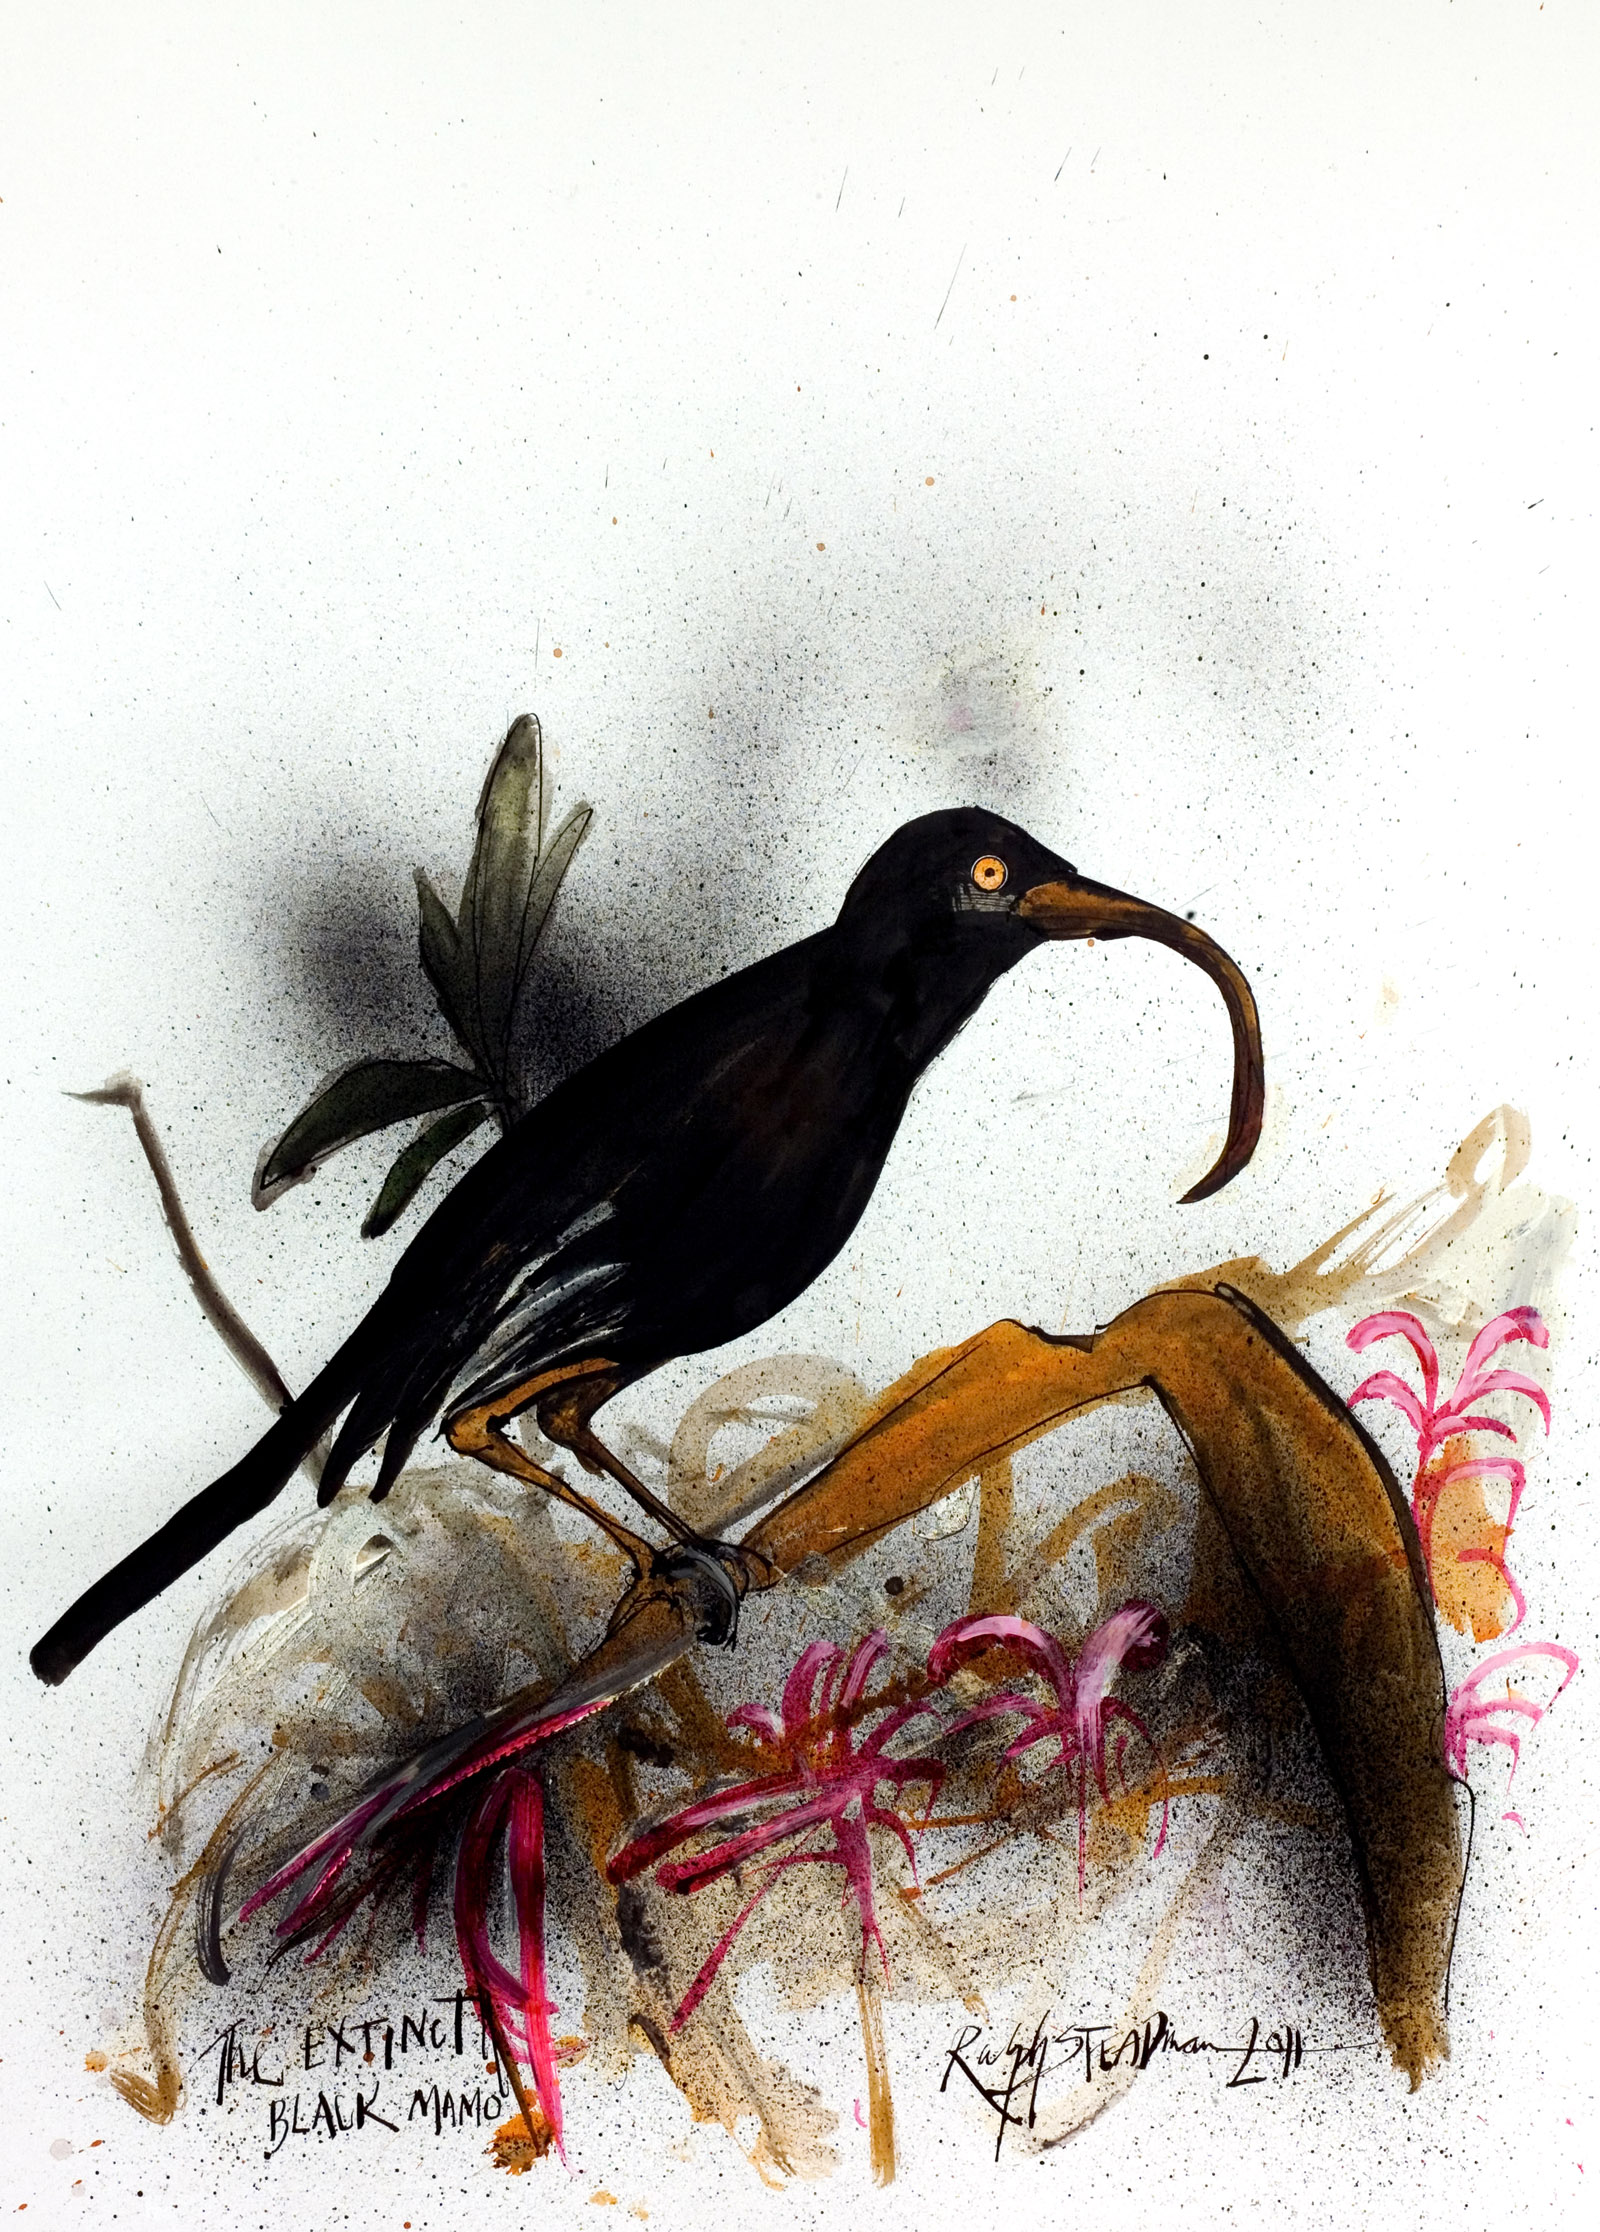 Illustrations of extinct birds by Ralph Steadman for his his first collaboration with Gonzovationist, Ceri Levy